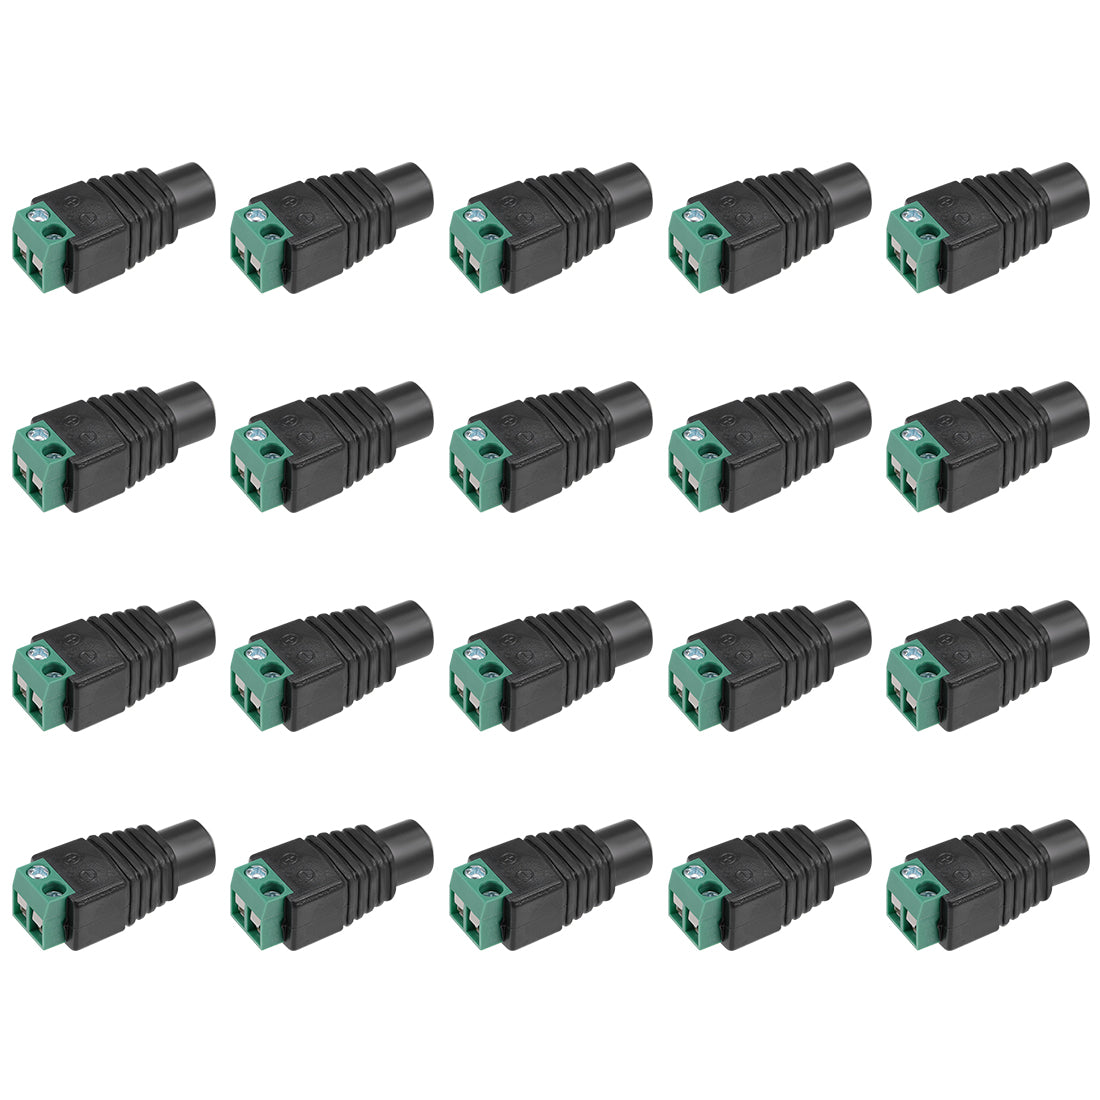 uxcell Uxcell 20Pcs Female 5.5x2.1mm DC Power Jack Adapter Connector for CCTV Security Camera